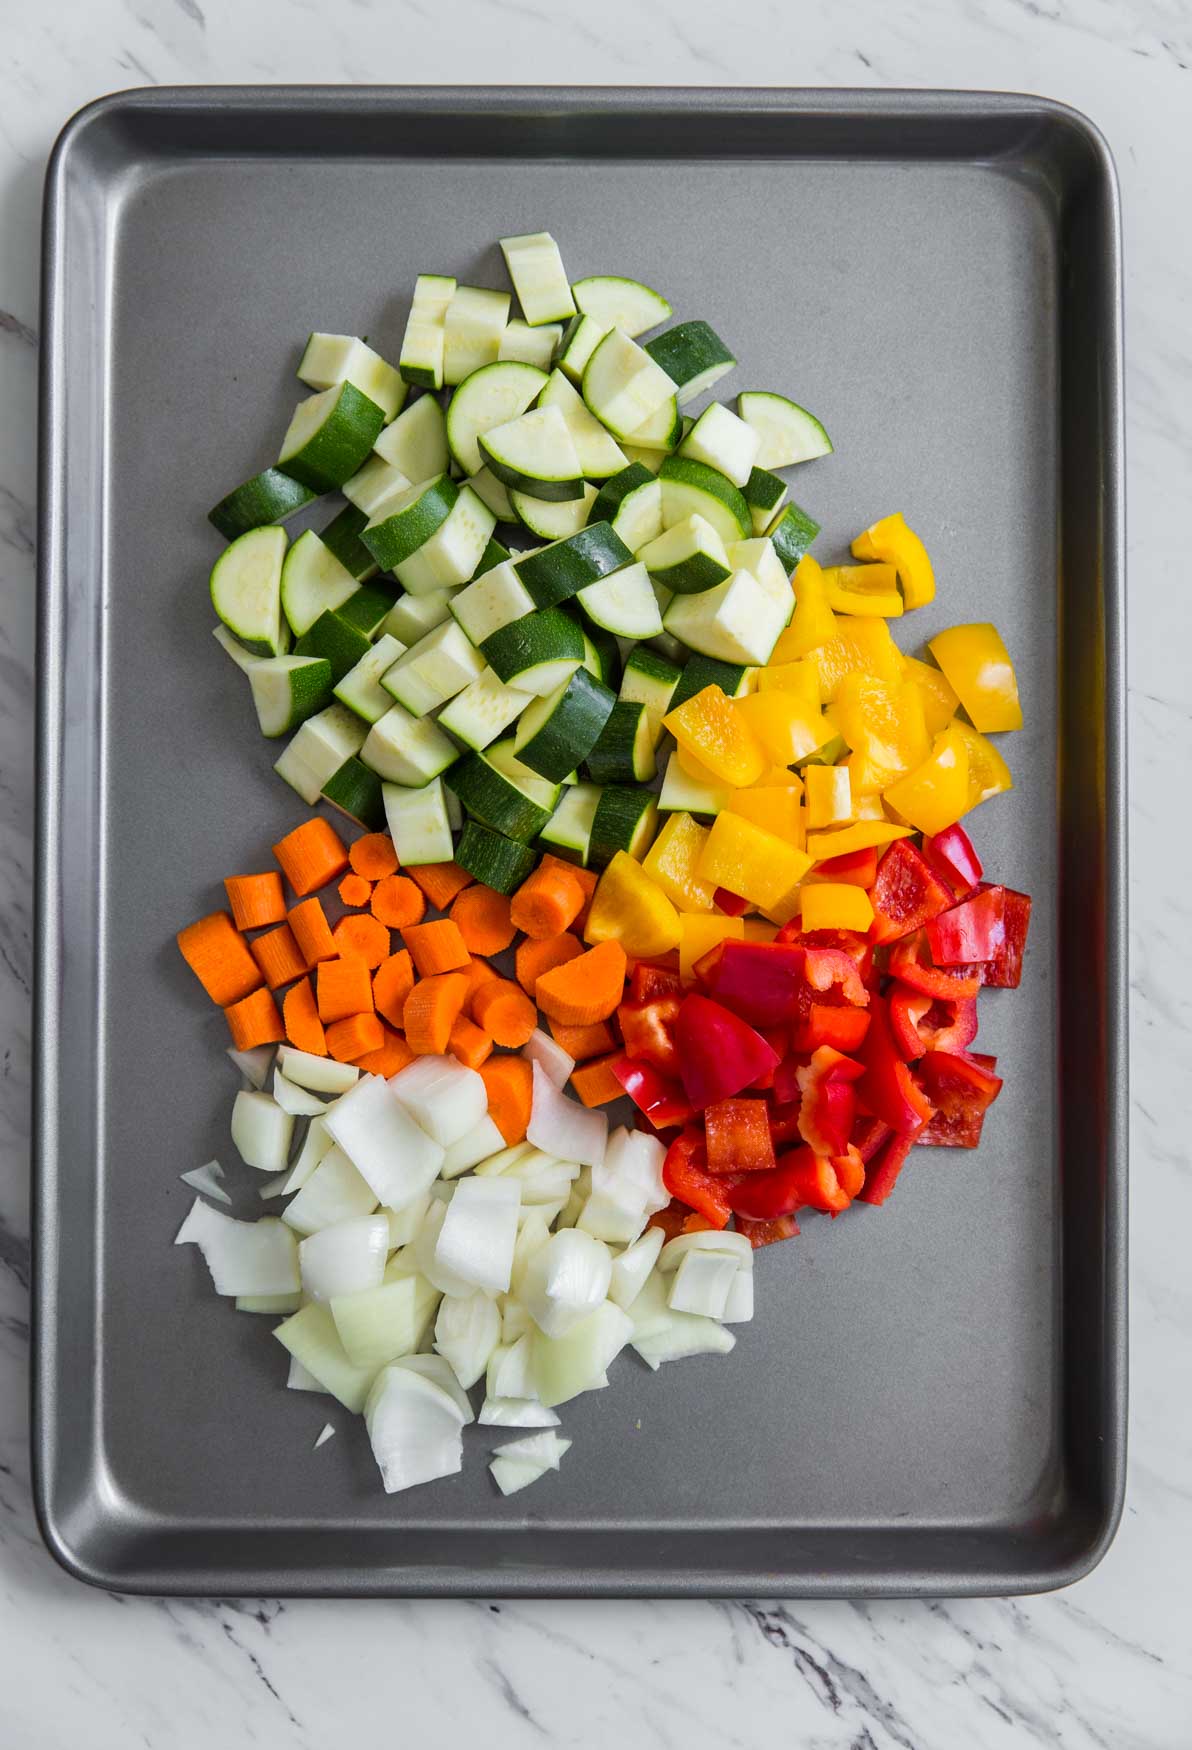 Vegetables cut into bite-size pieces in a baking pan